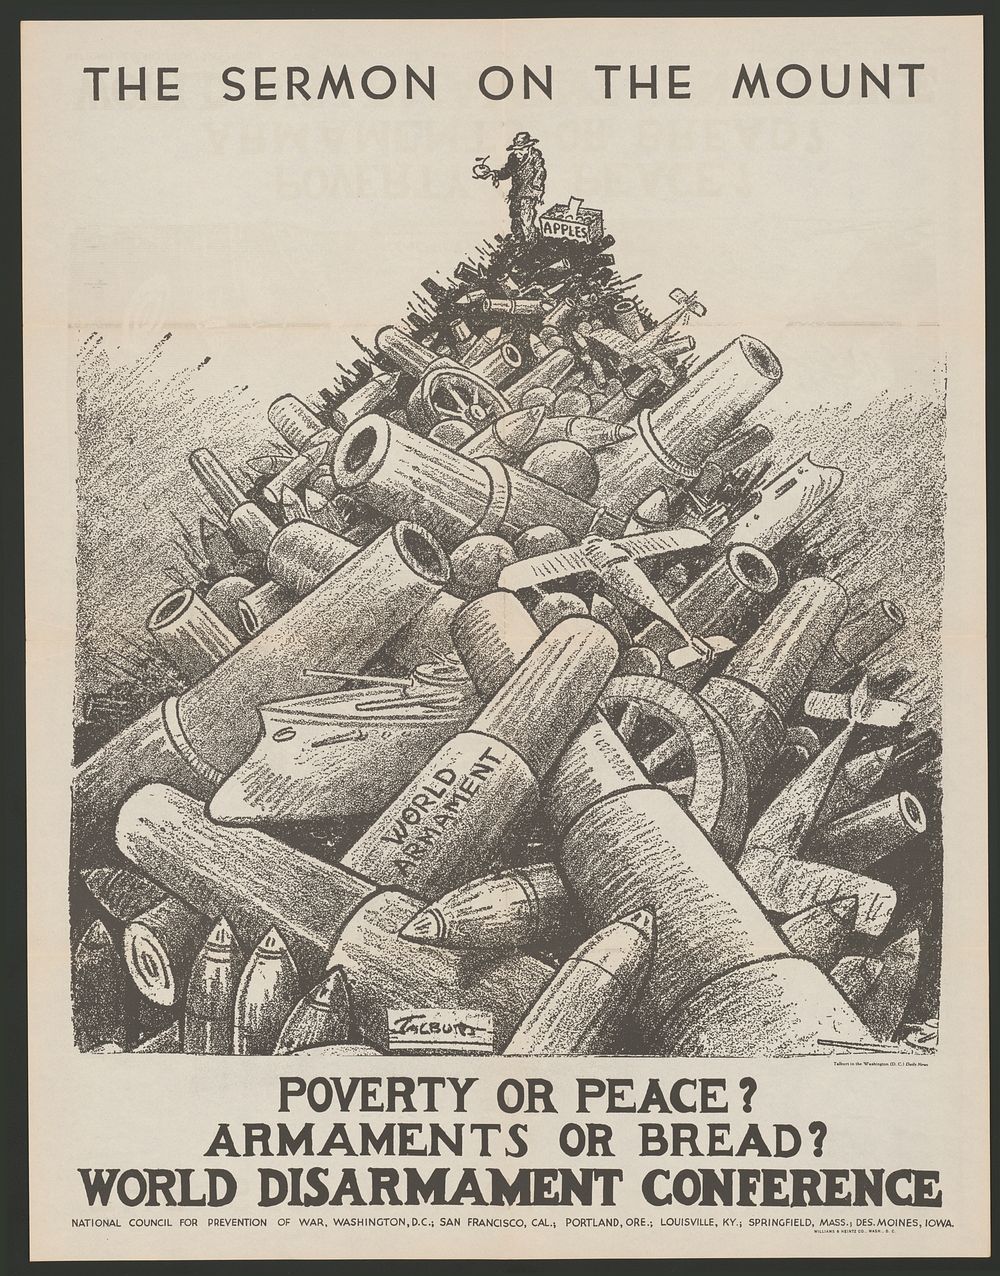 The sermon on the mount. Poverty or peace? Aramaments or bread? World disarmament conference